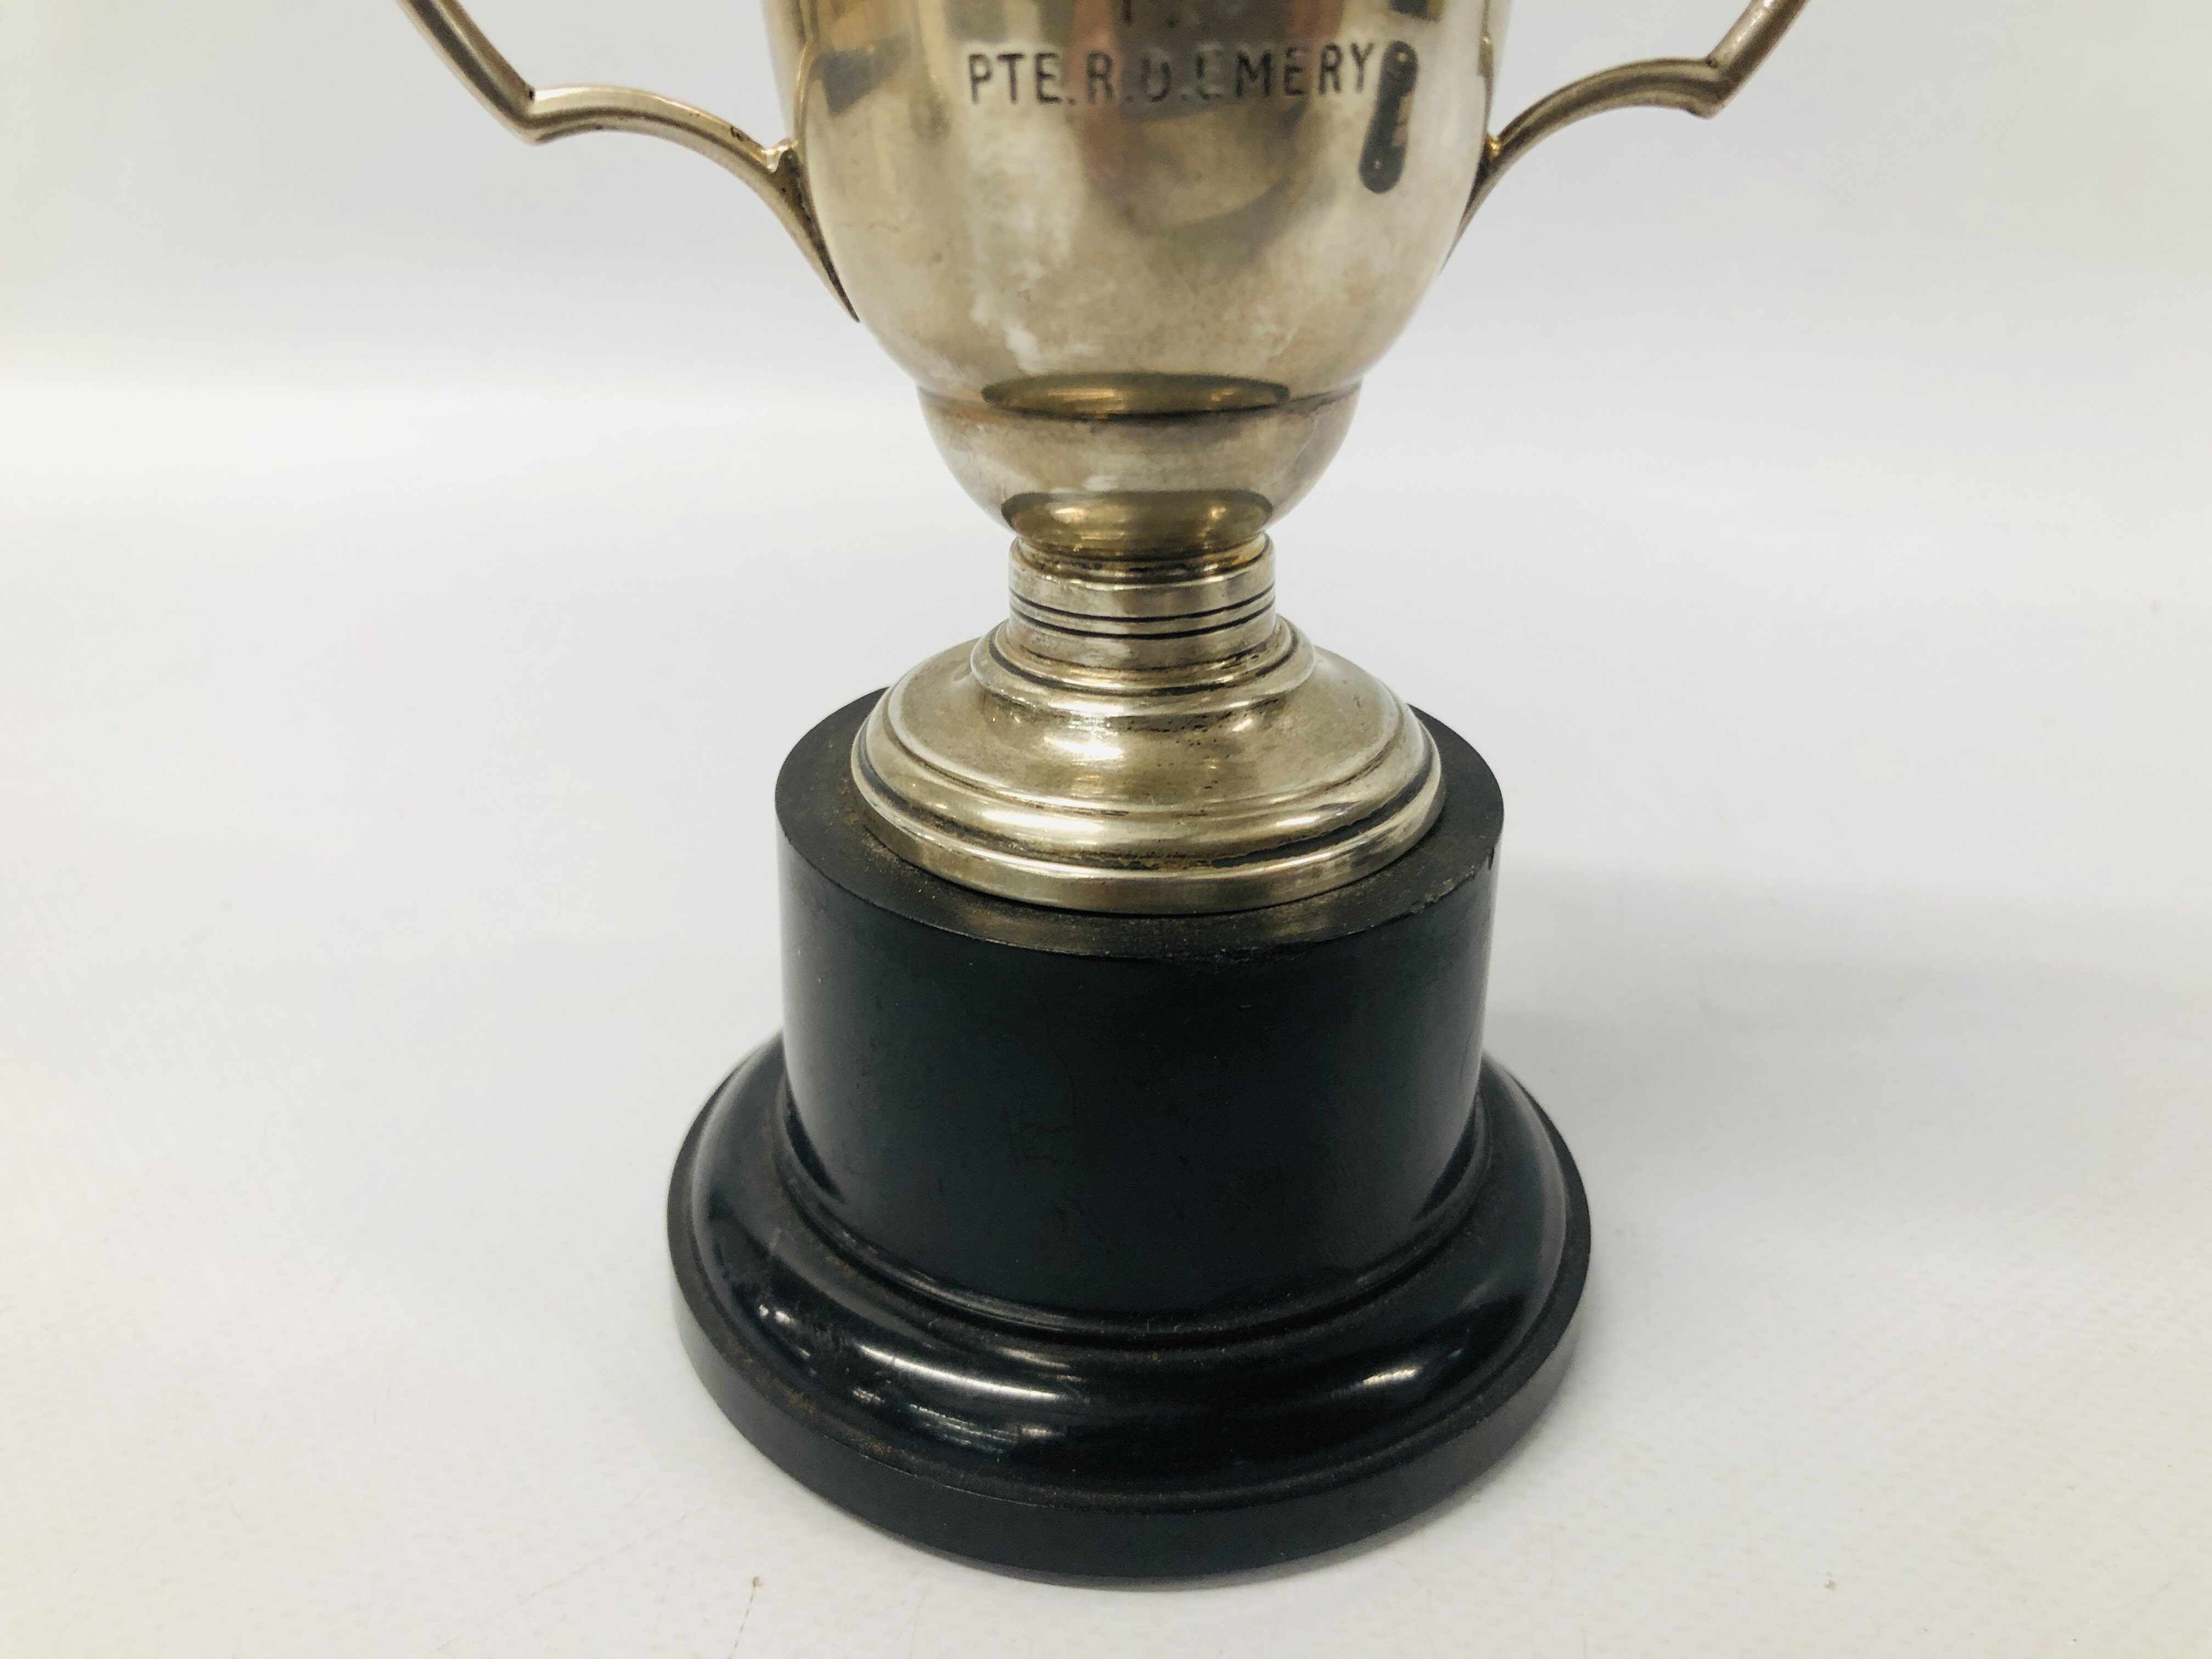 AN ANTIQUE TWO HANDLED SILVER PRESENTATION CUP BEARING INSCRIPTION RELATING TO THE PLATOON - Image 10 of 14